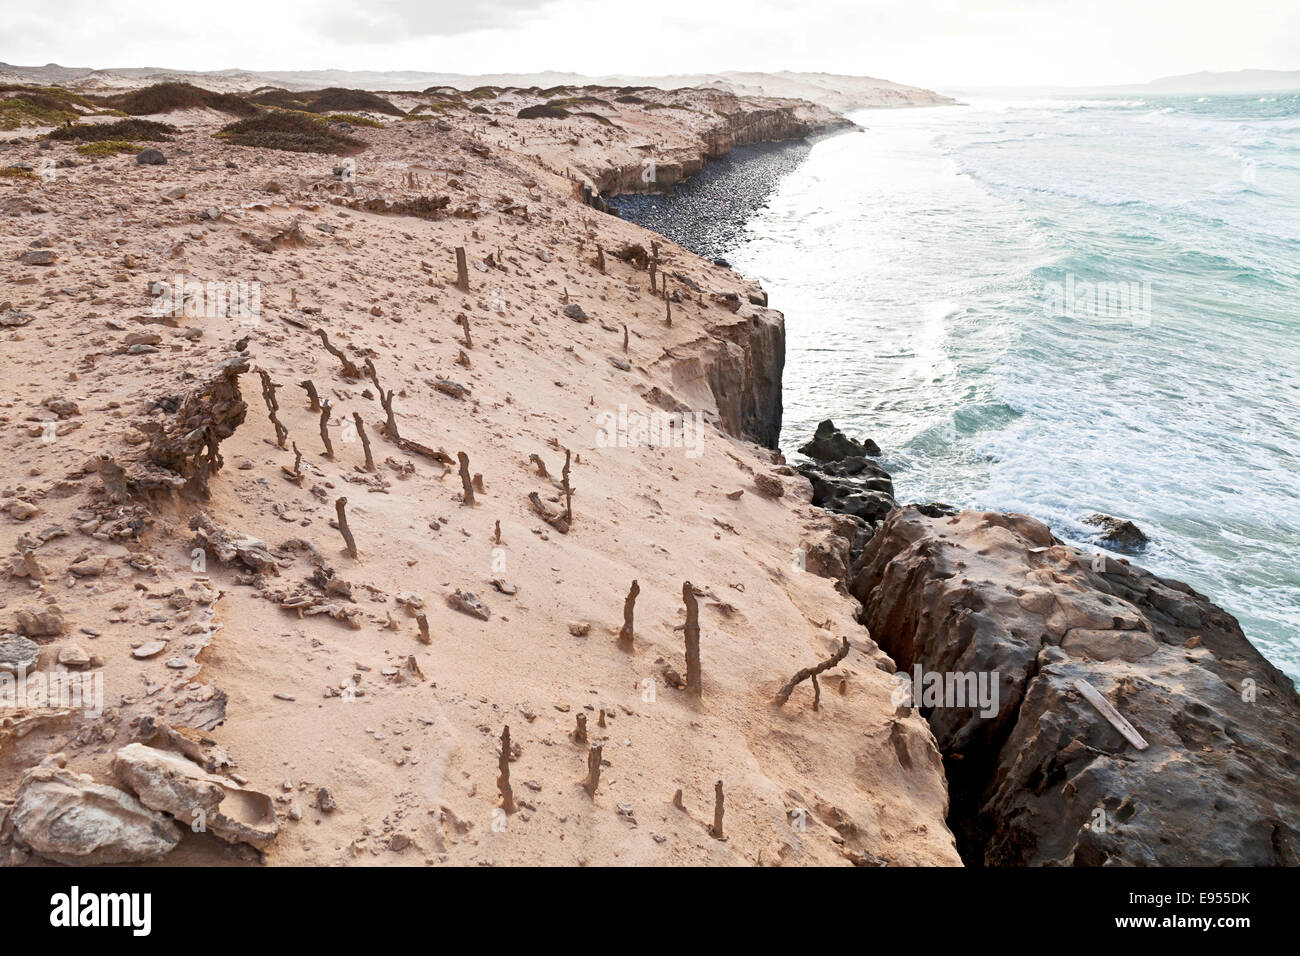 Fulgurites on the sandy cliffs of Praia de Boa Esperanca Beach, sand tubes fused by lightning, the formations stand out from the Stock Photo